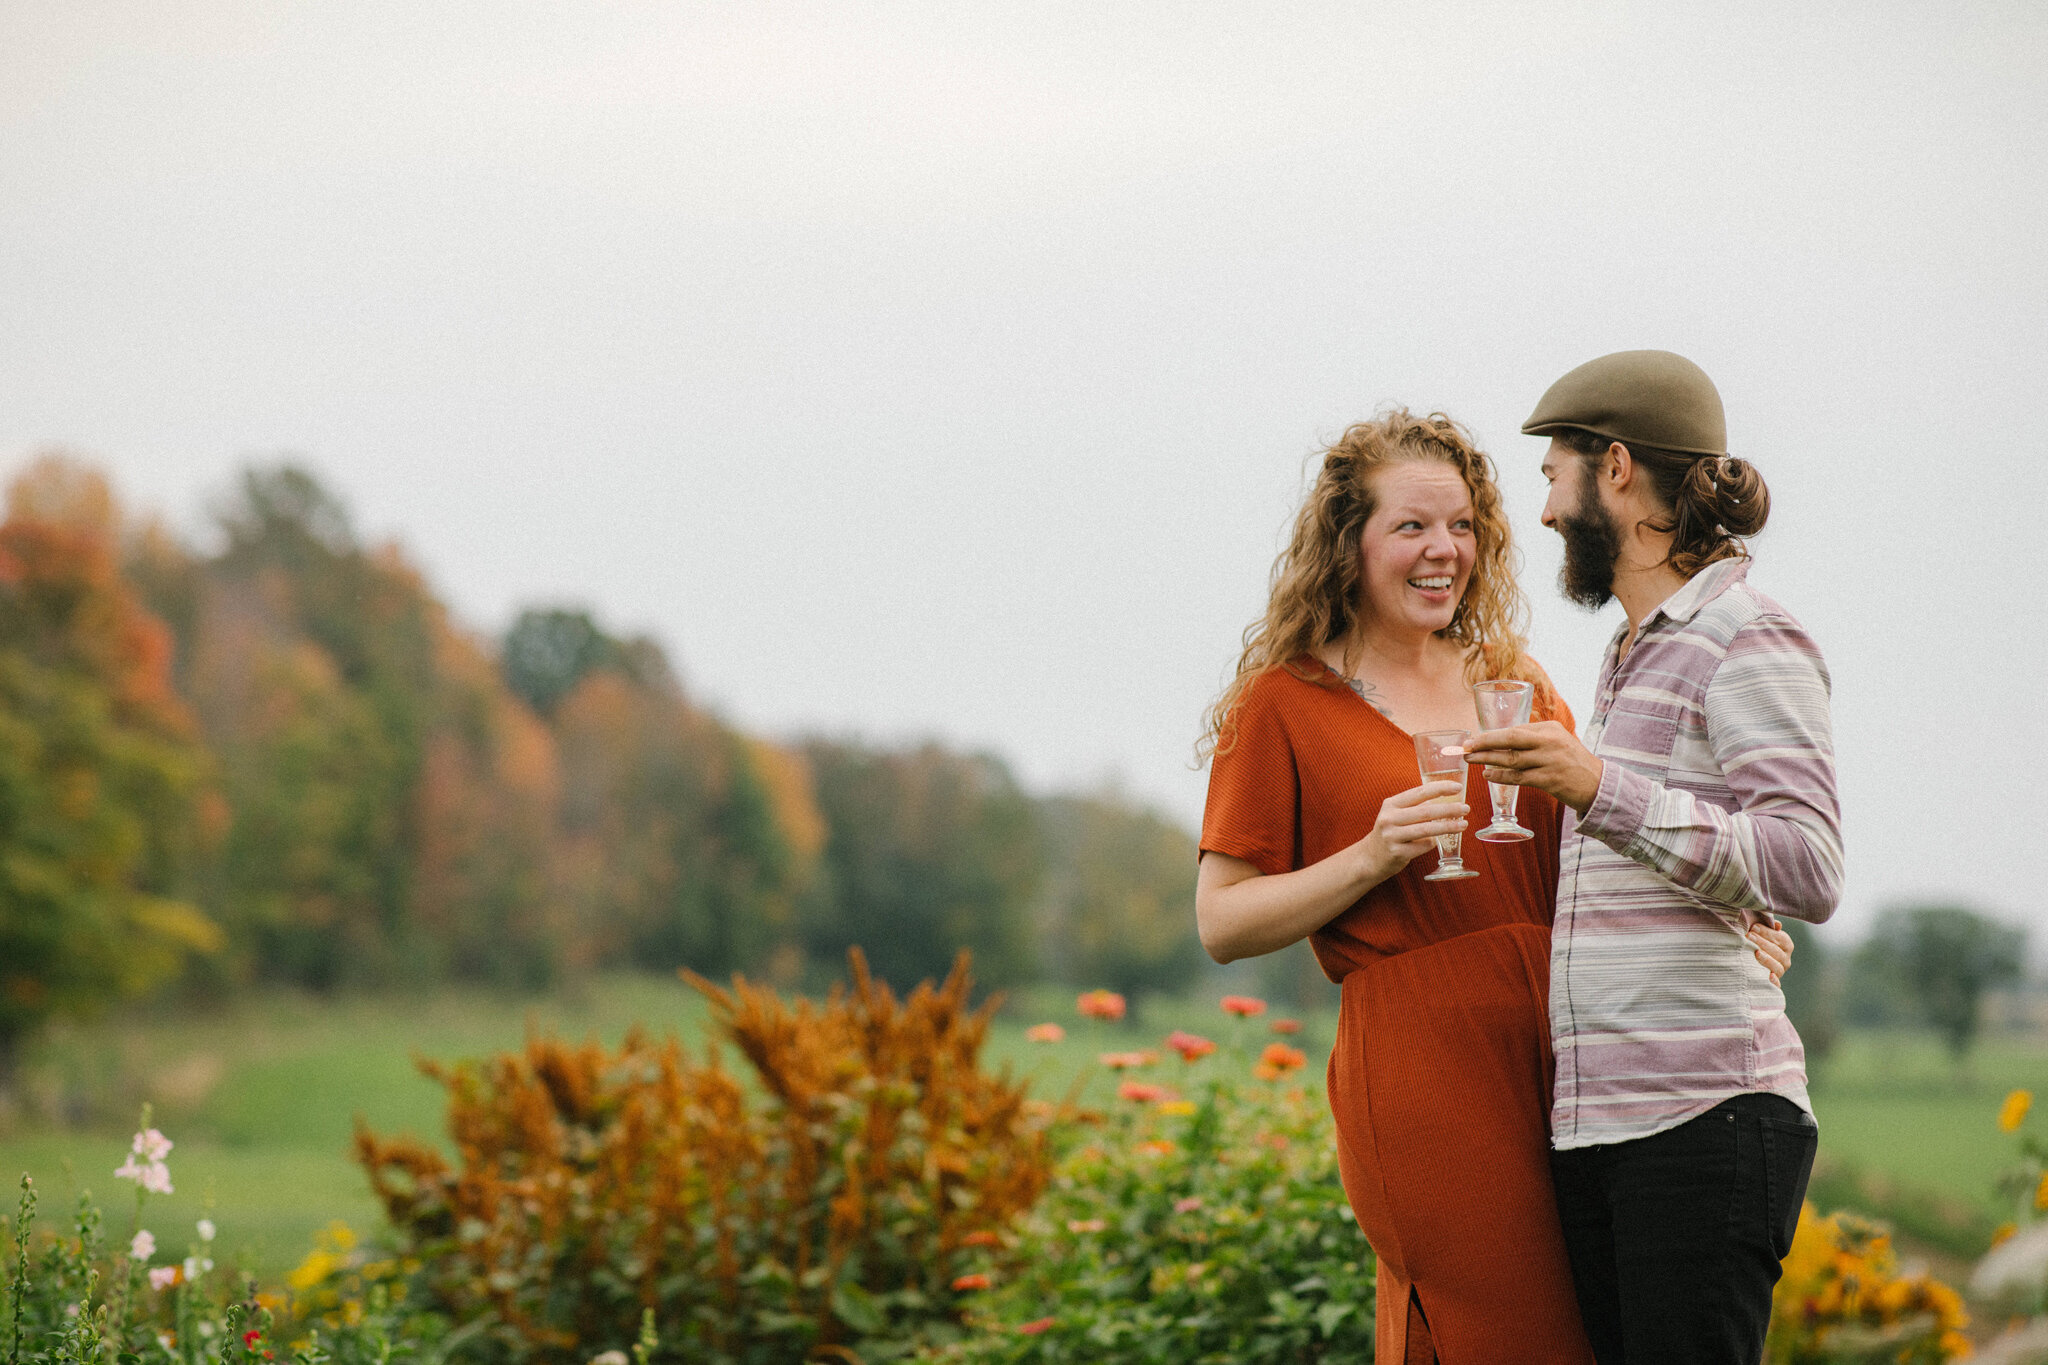 Celebrating right after surprise proposal at Harvest Moon Farm